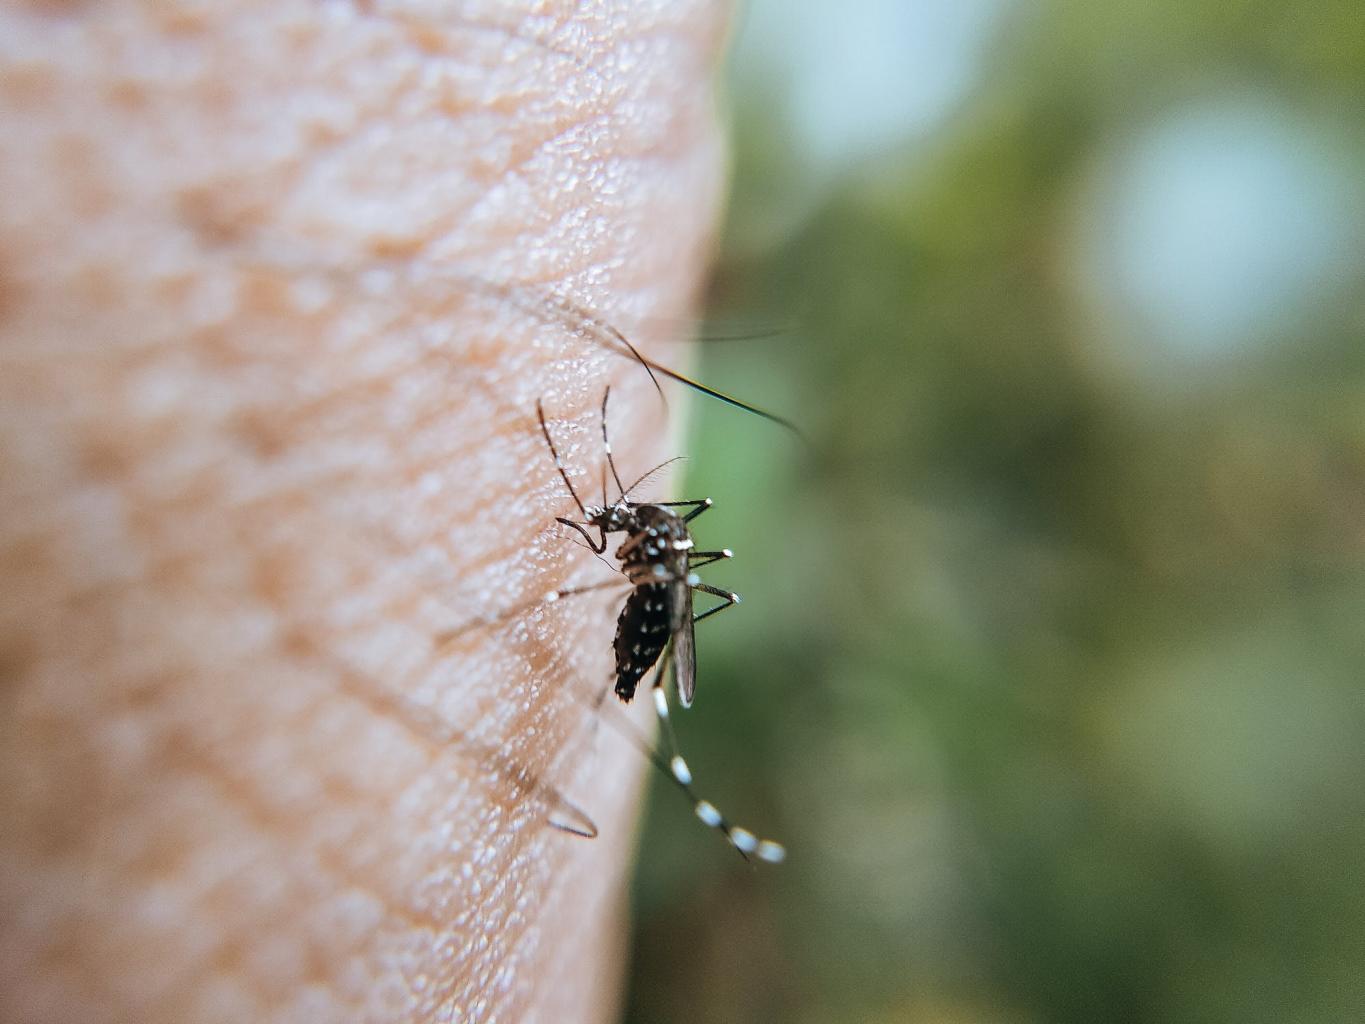 Image of a mosquito on skin